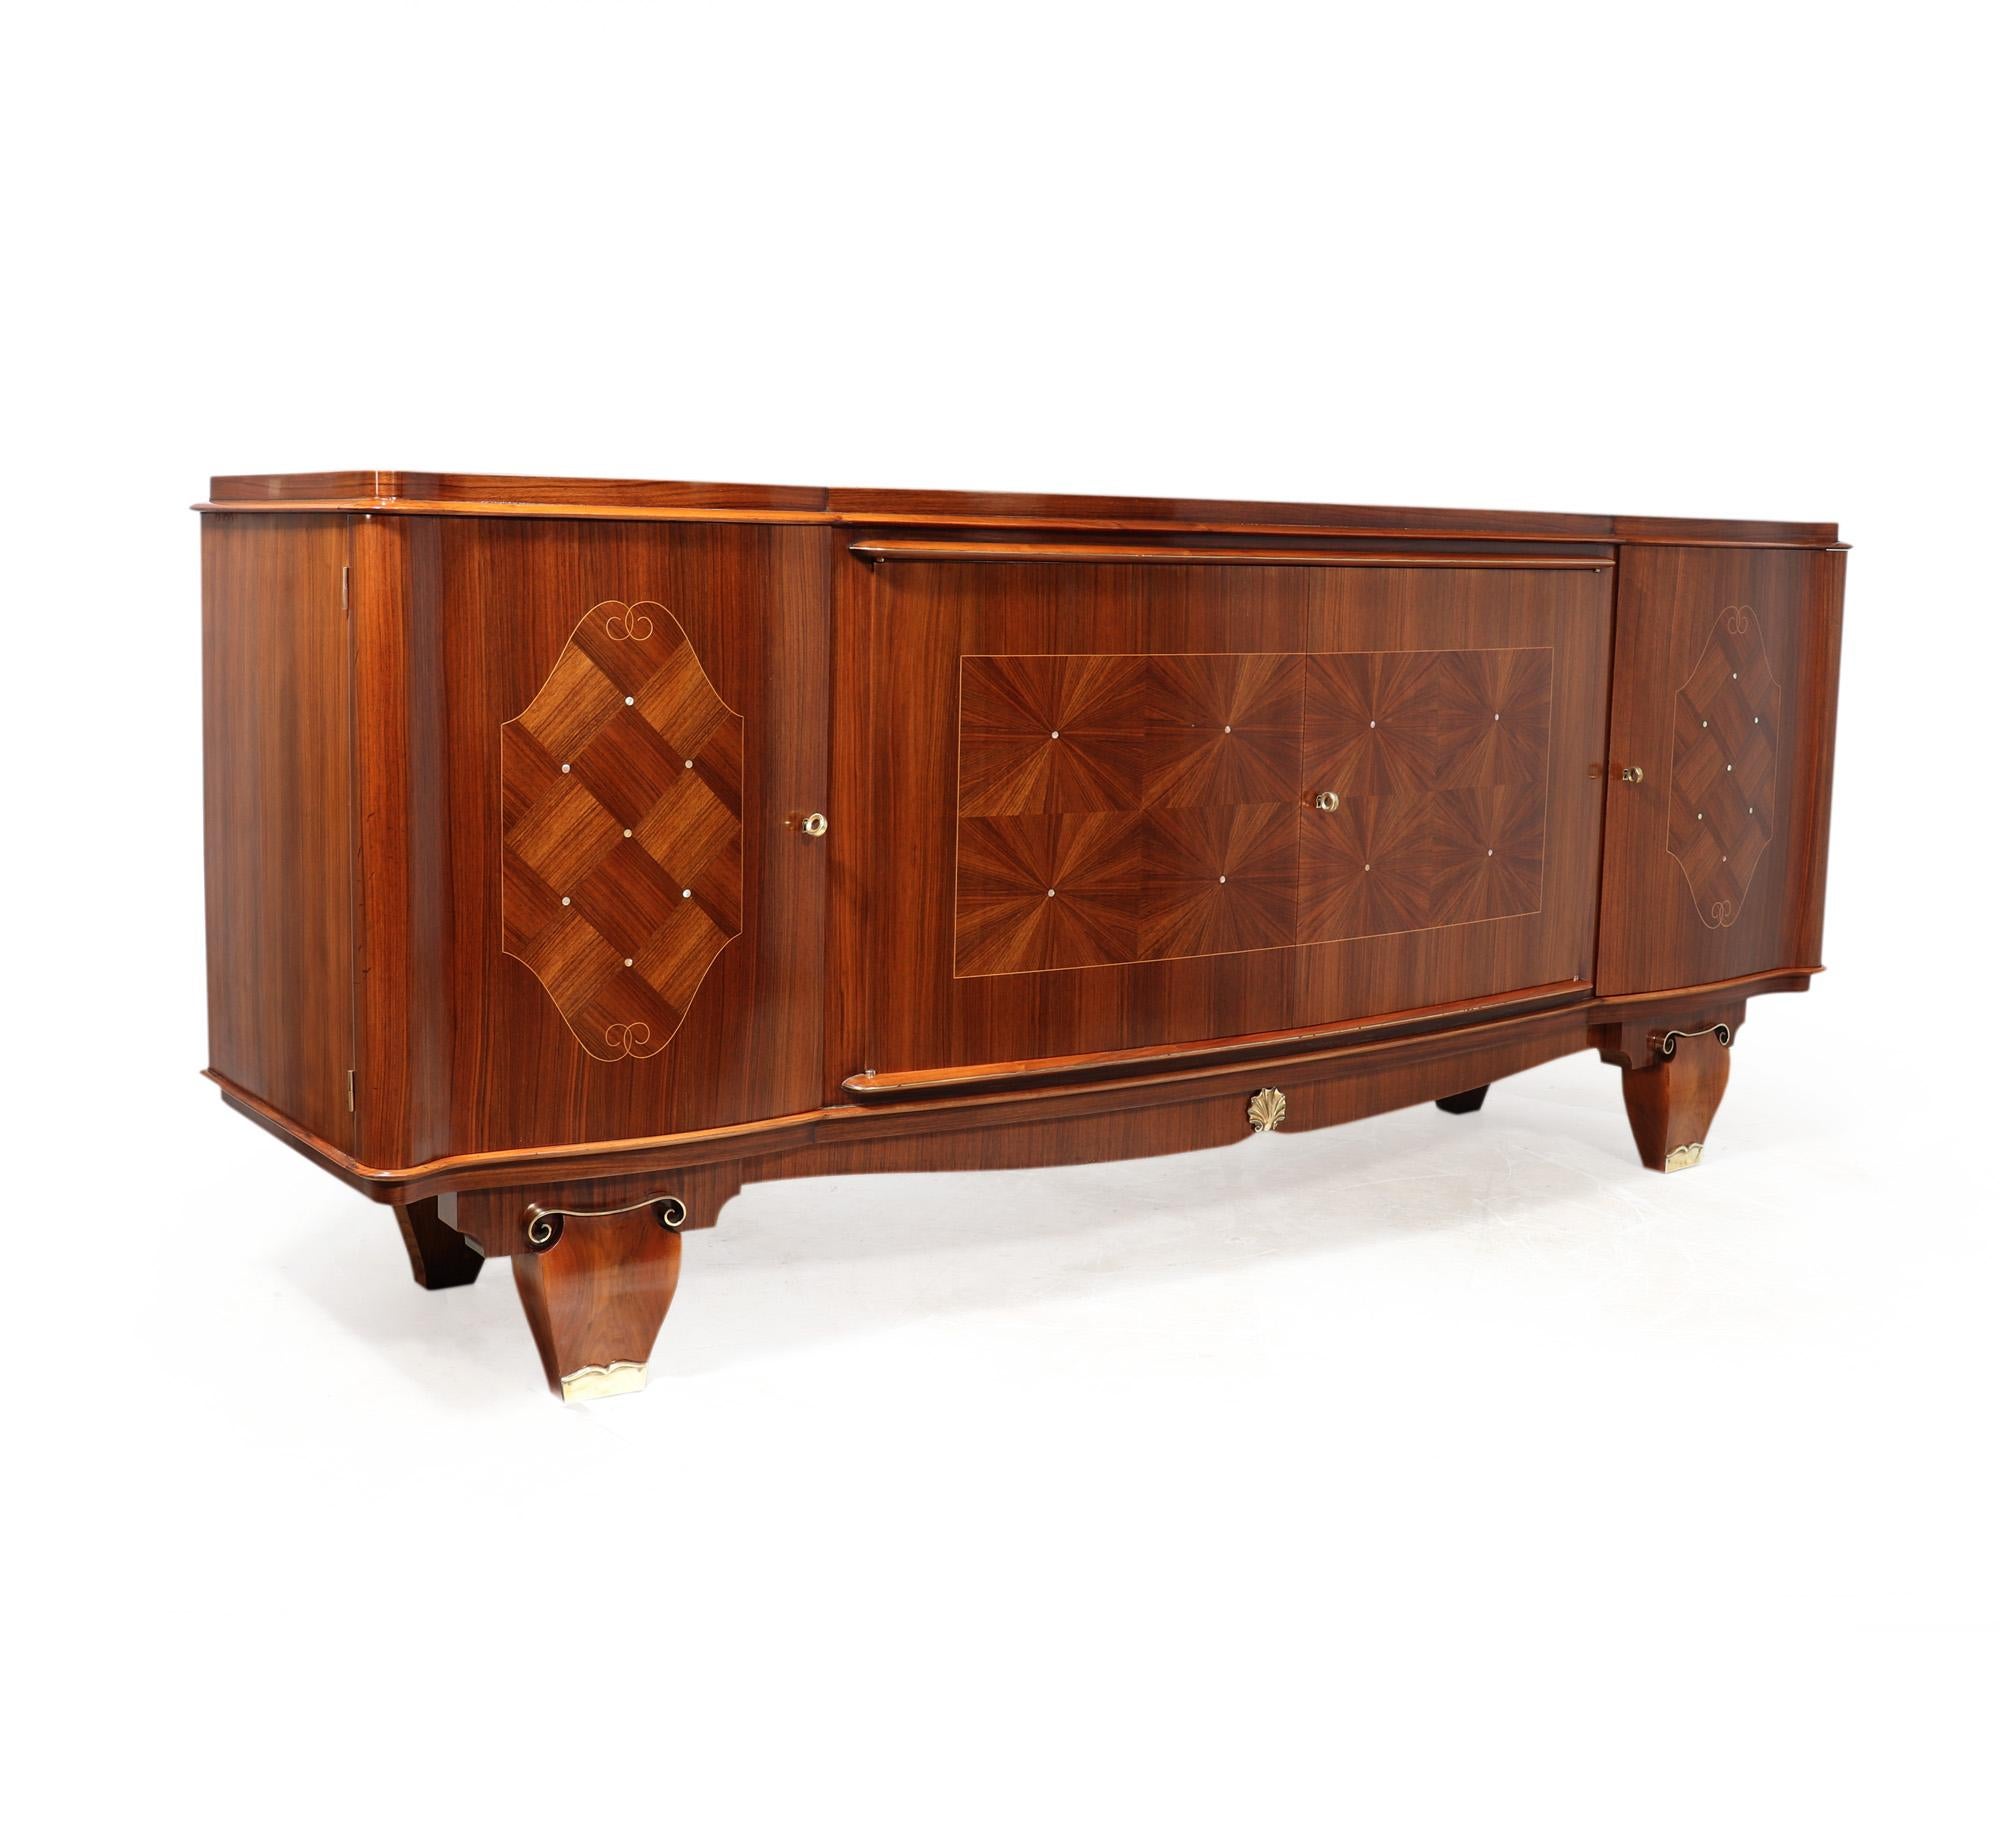 ART DECO SIDEBOARD BY JULES LELEU
A French Art Deco sideboard produced by Jules Leleu around the 1940 in straight grain walnut with parquetry and segmented inlay highlighted with mother of pearl and blonde wood stringing, the sideboard is lined with